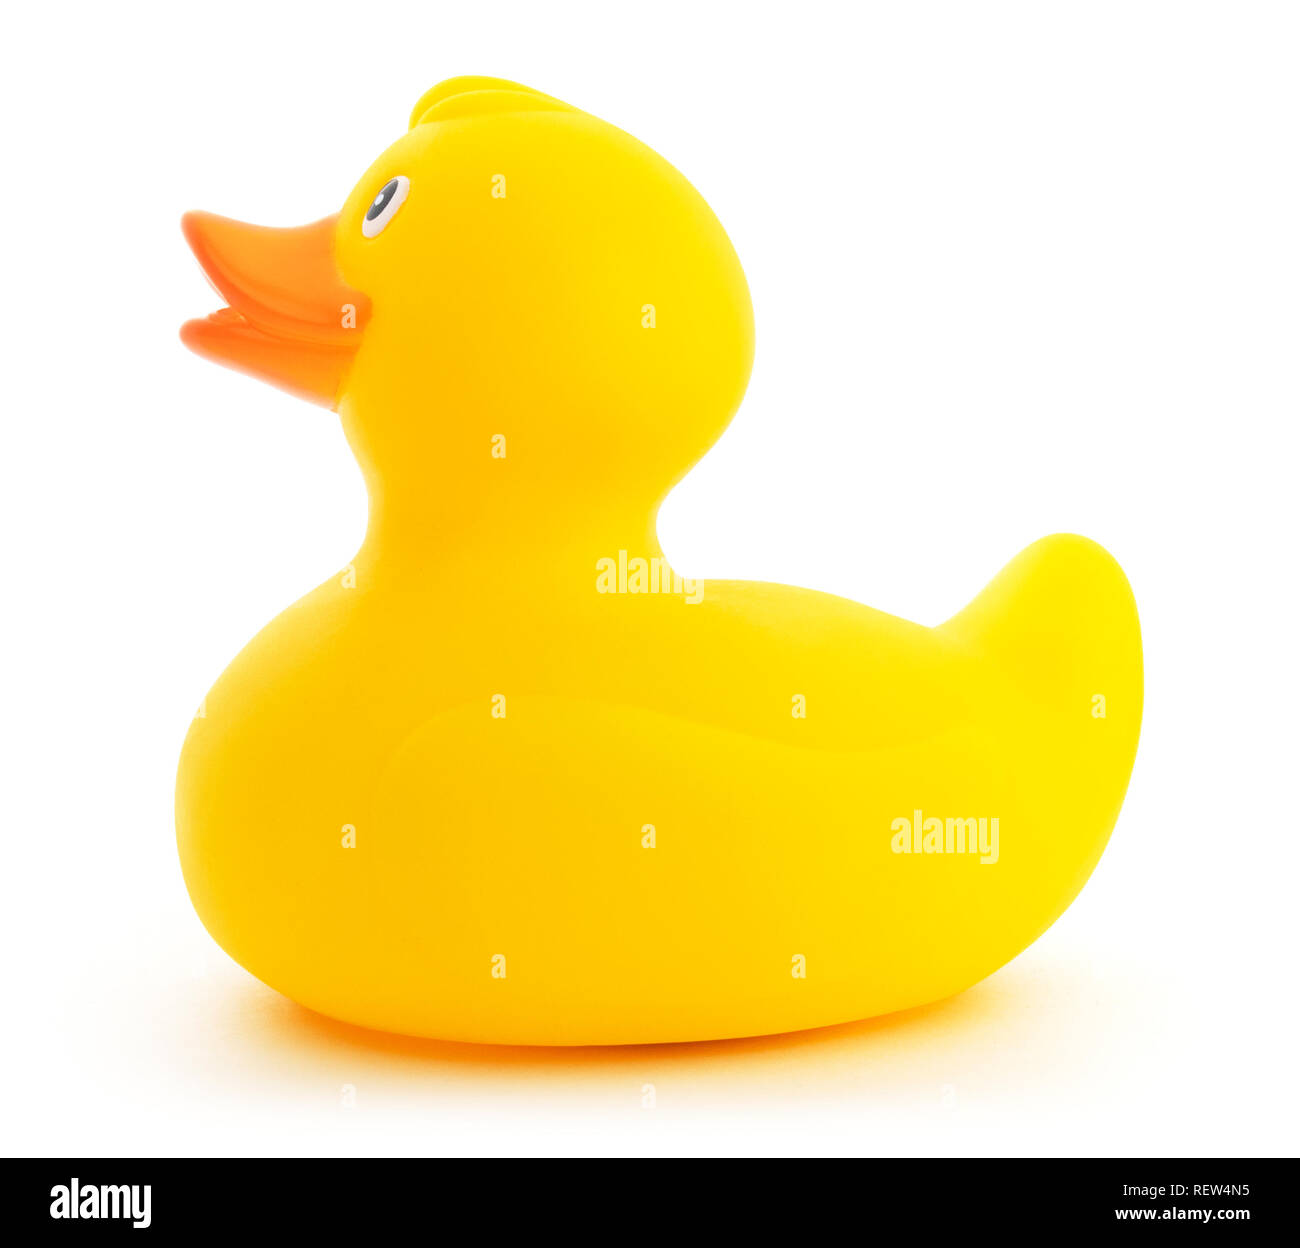 Isolated yellow plastic rubber ducky toy. Side view of a cute yellow rubber duck on a white background. Stock Photo